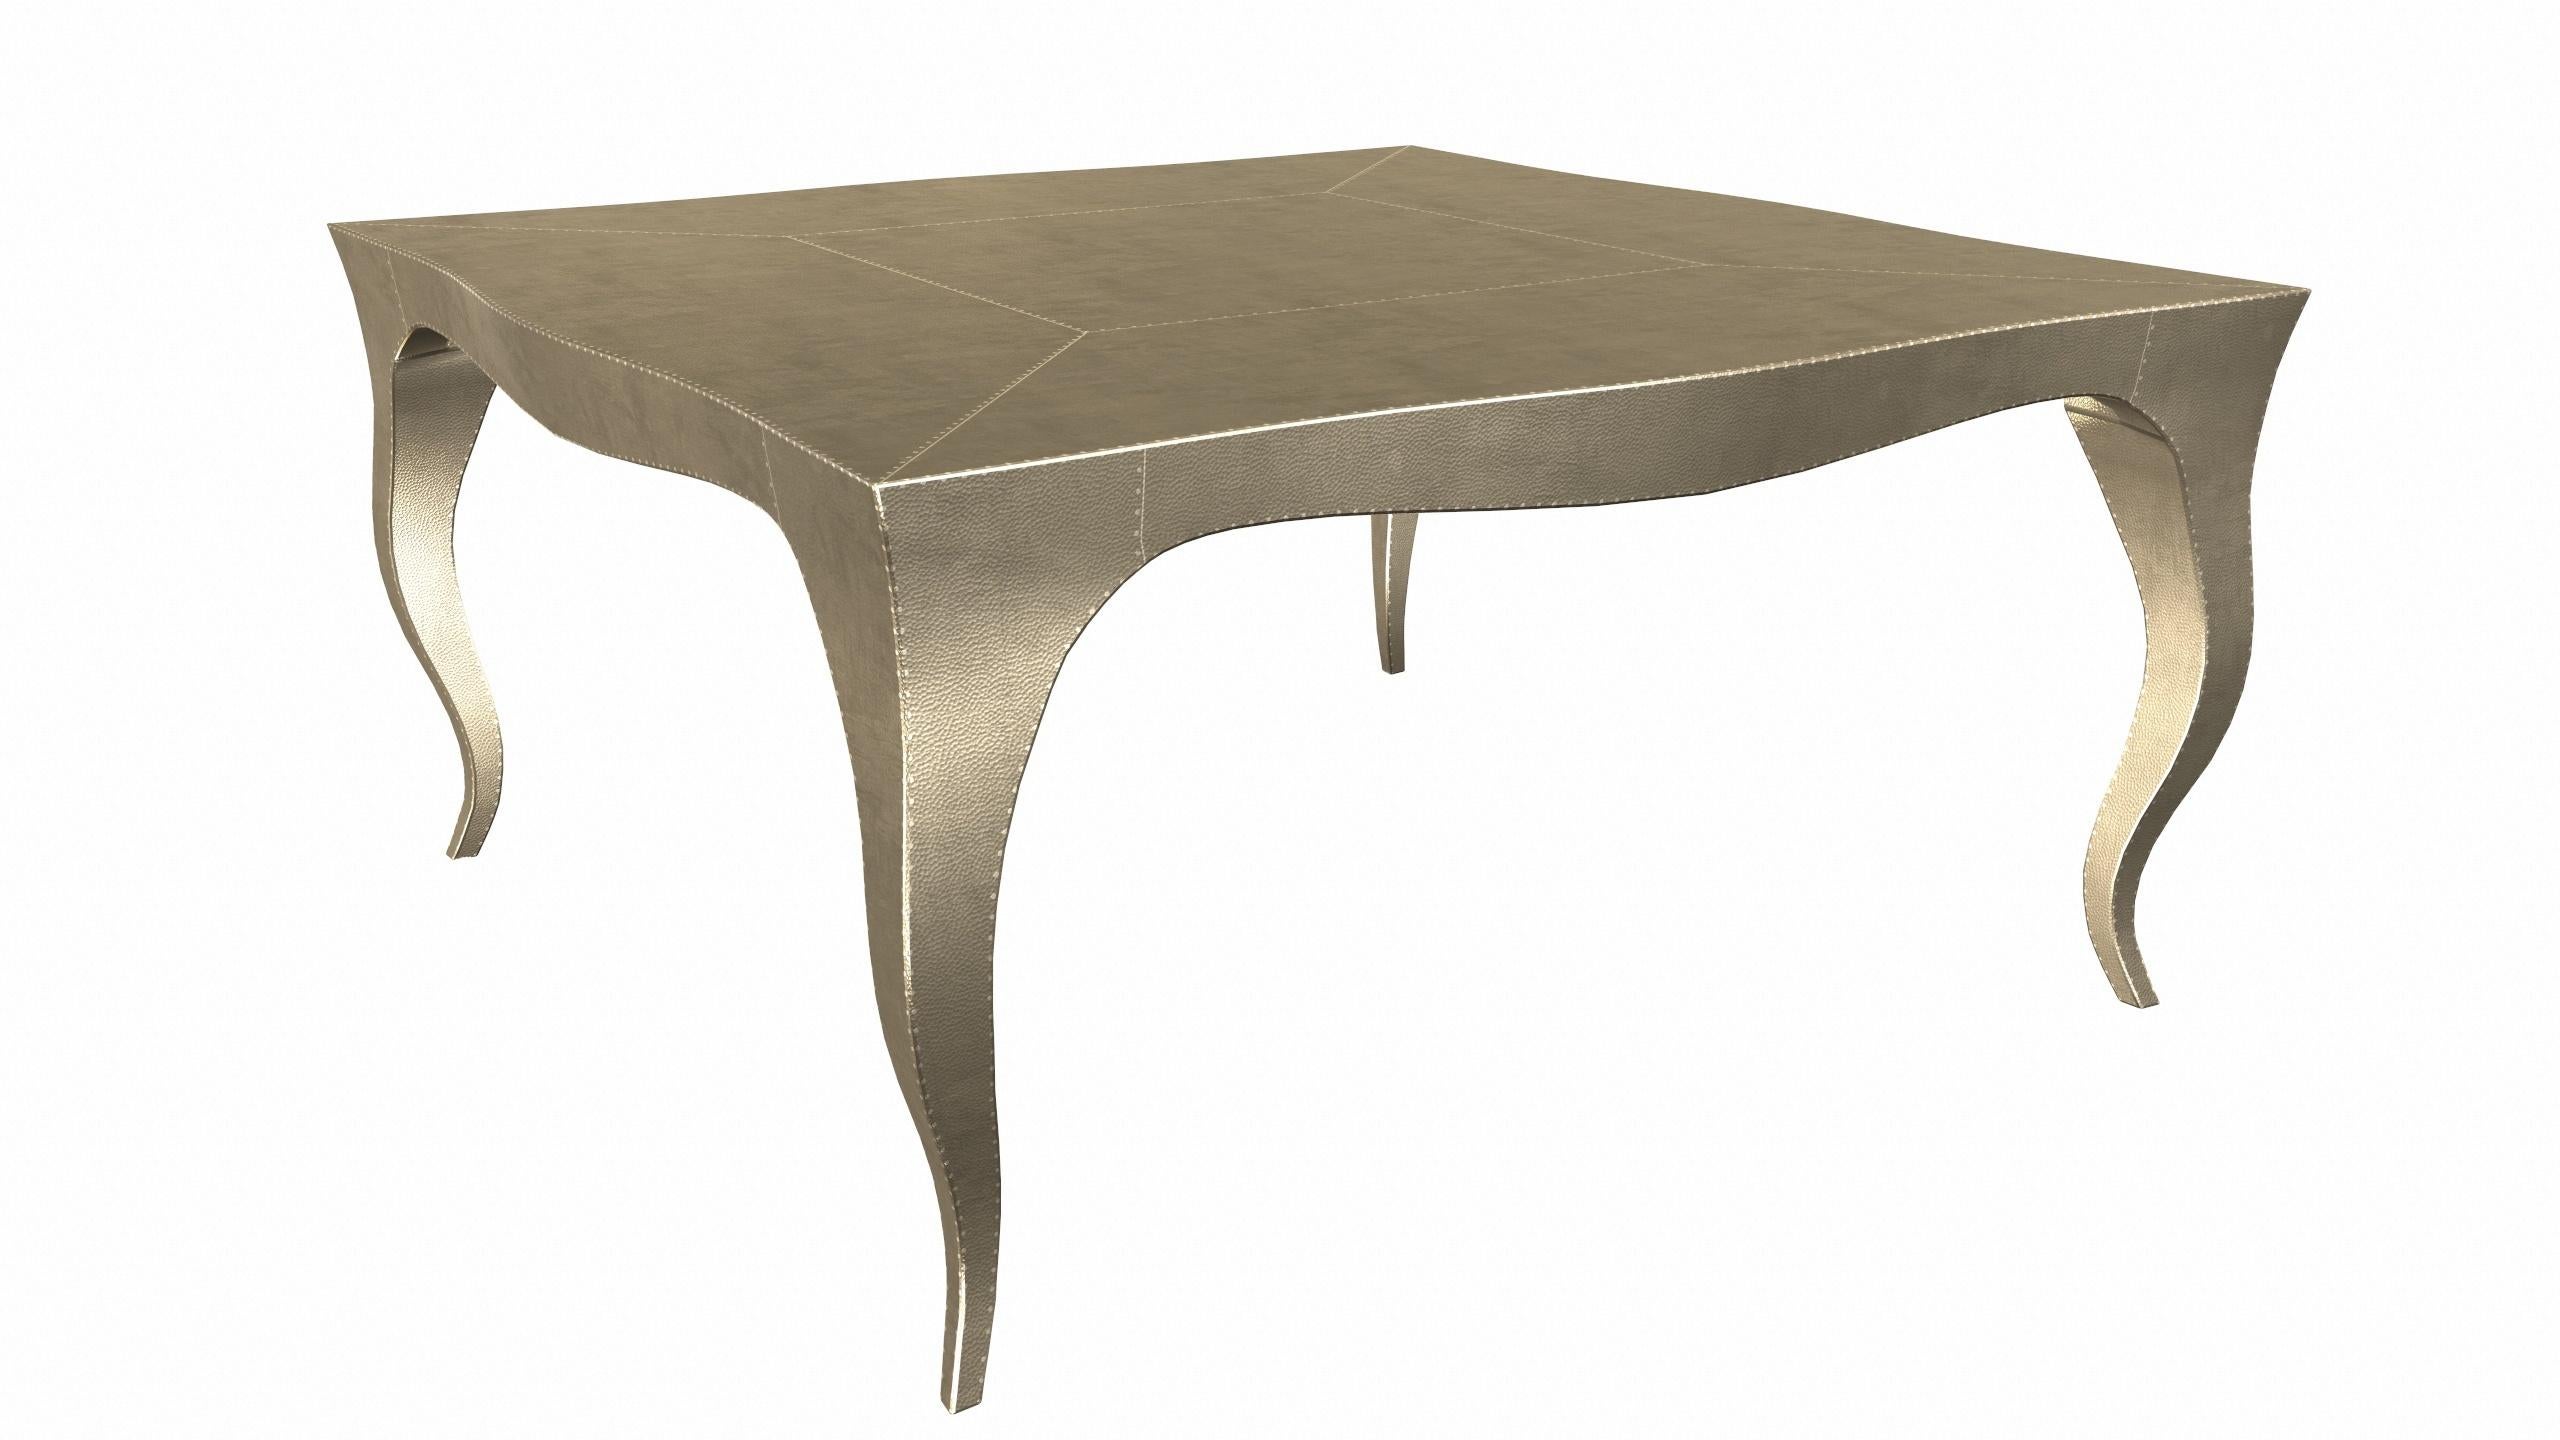 Metal Louise Art Deco Industrial and Work Tables Mid. Hammered Brass 18.5x18.5x10 inch For Sale